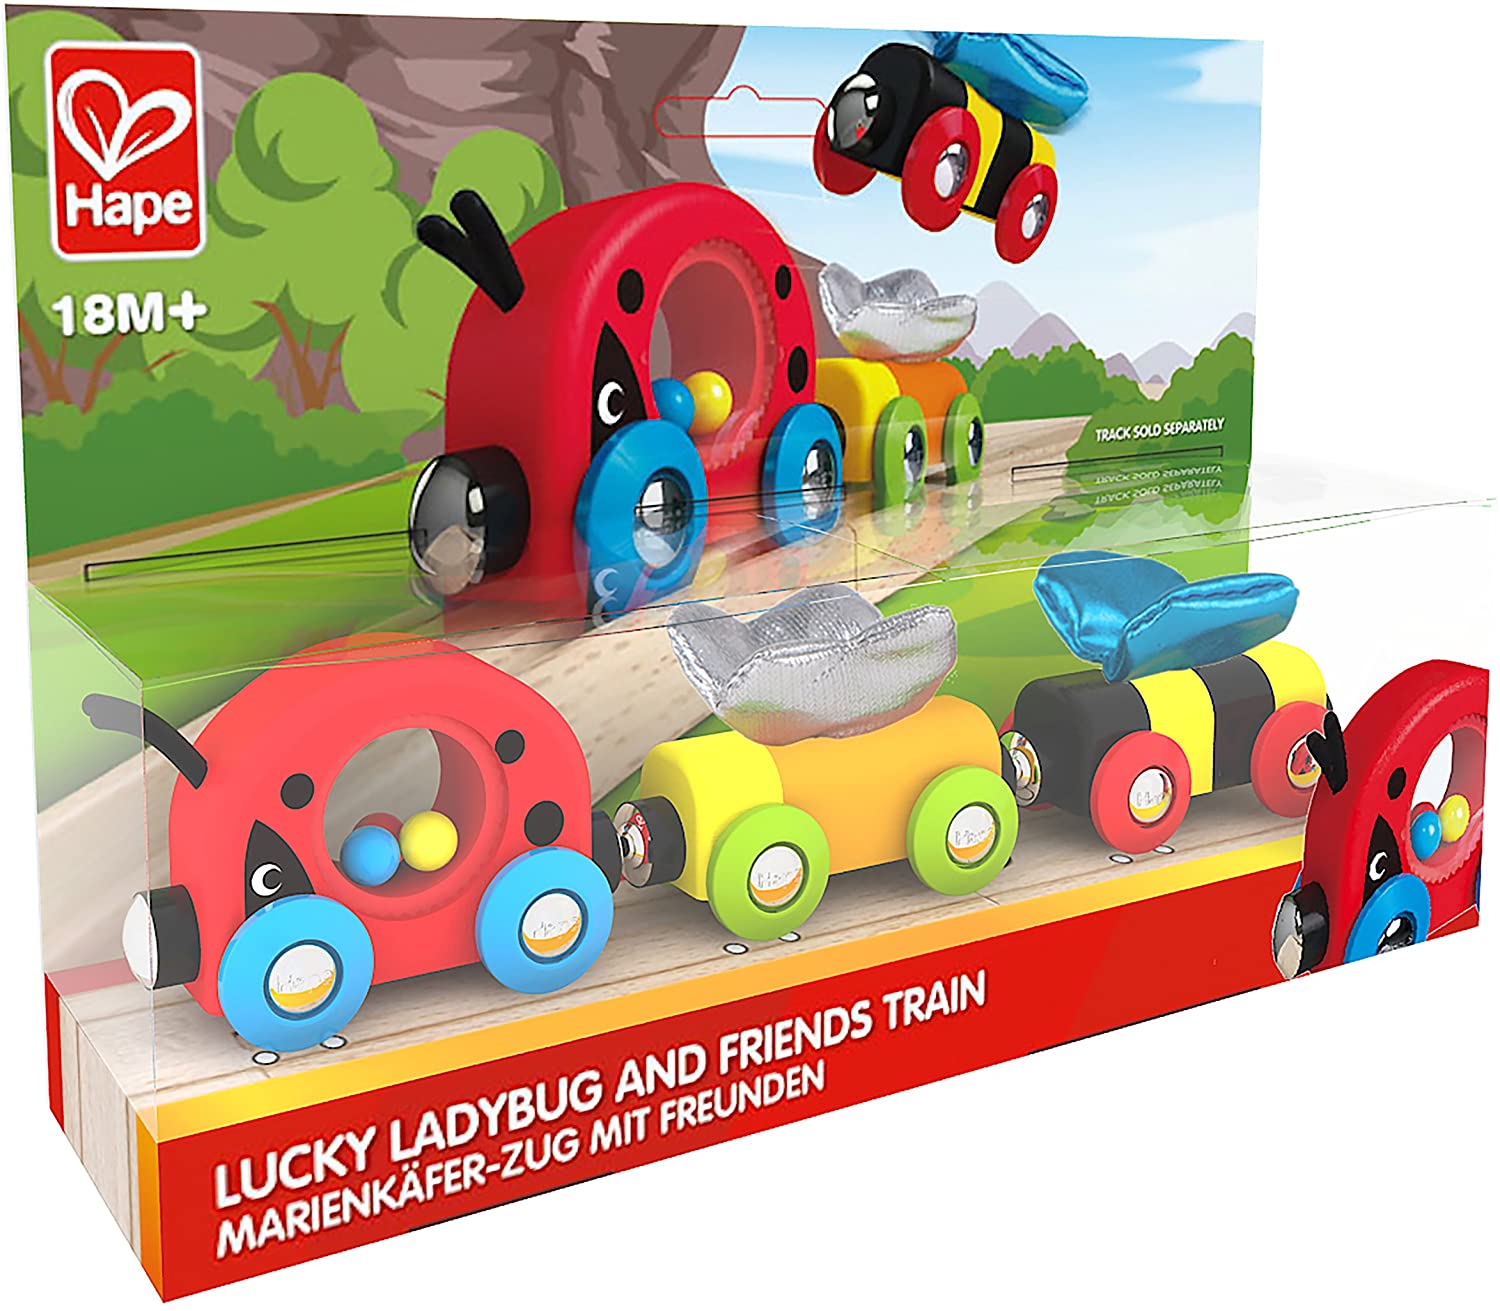 HAPE Ladybug and Friends Train - ANB Baby -activity toy